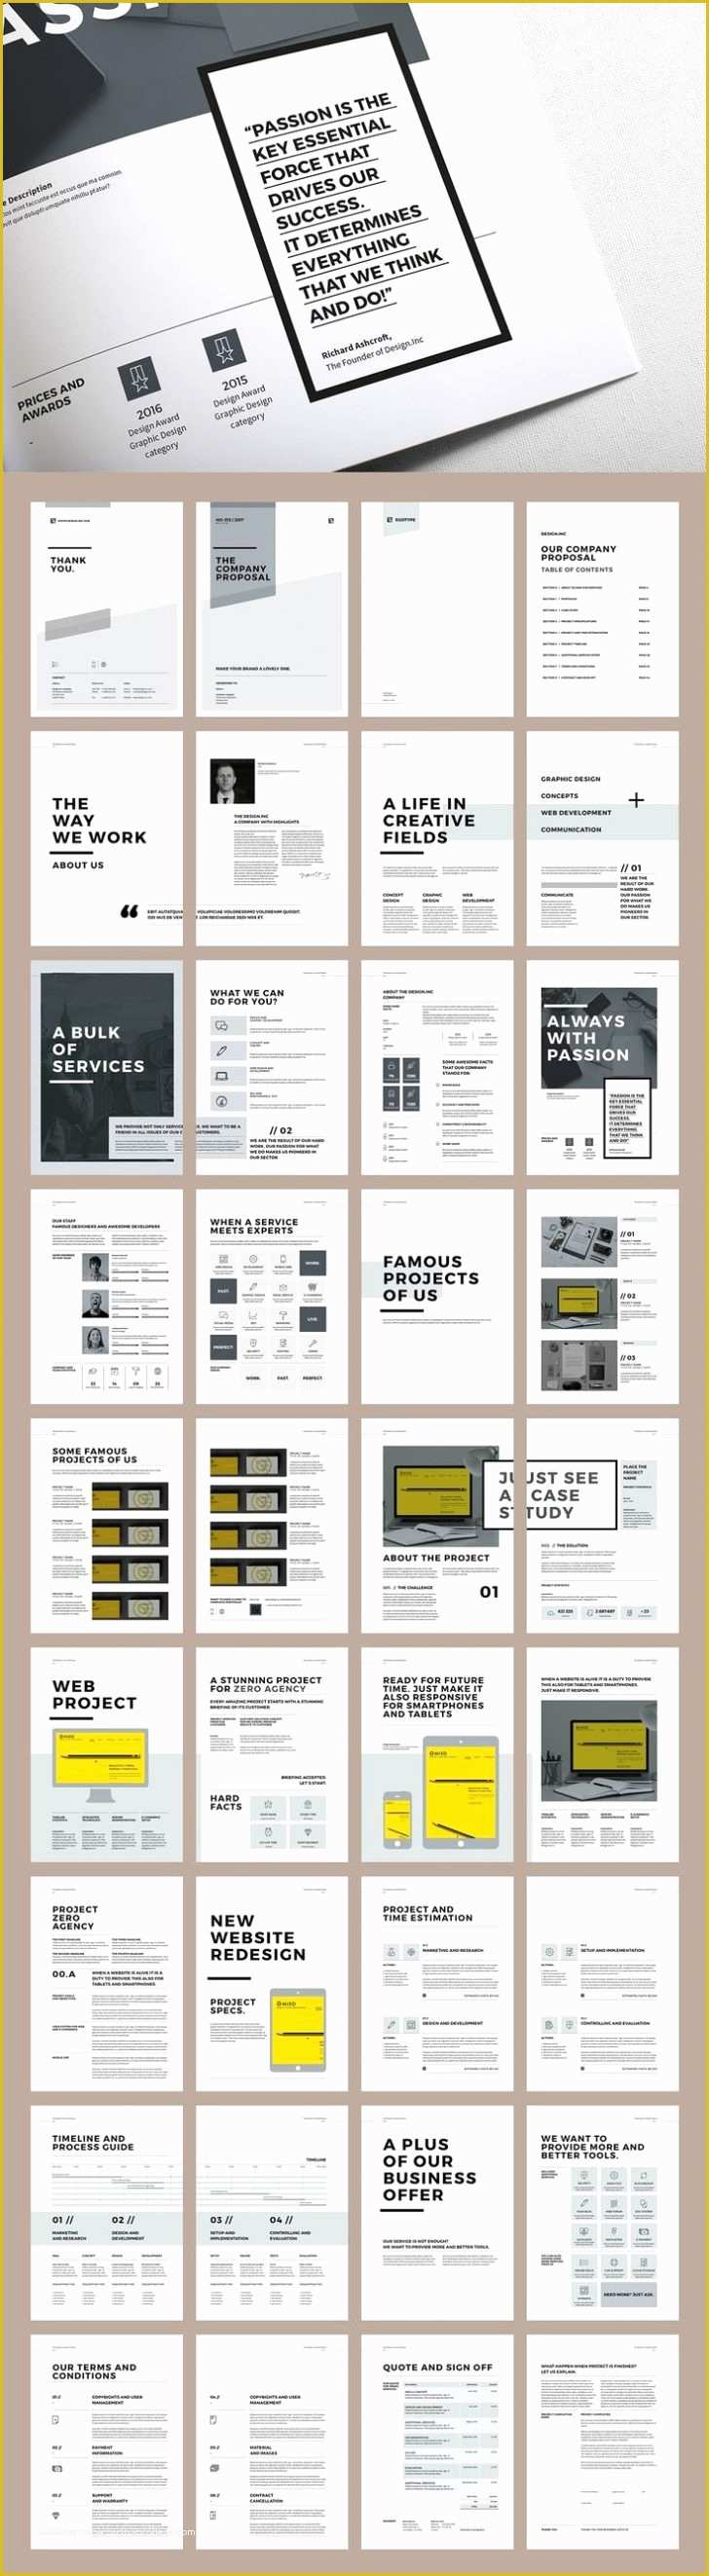 Free Indesign Yearbook Template Download Of Contemporary Yearbook